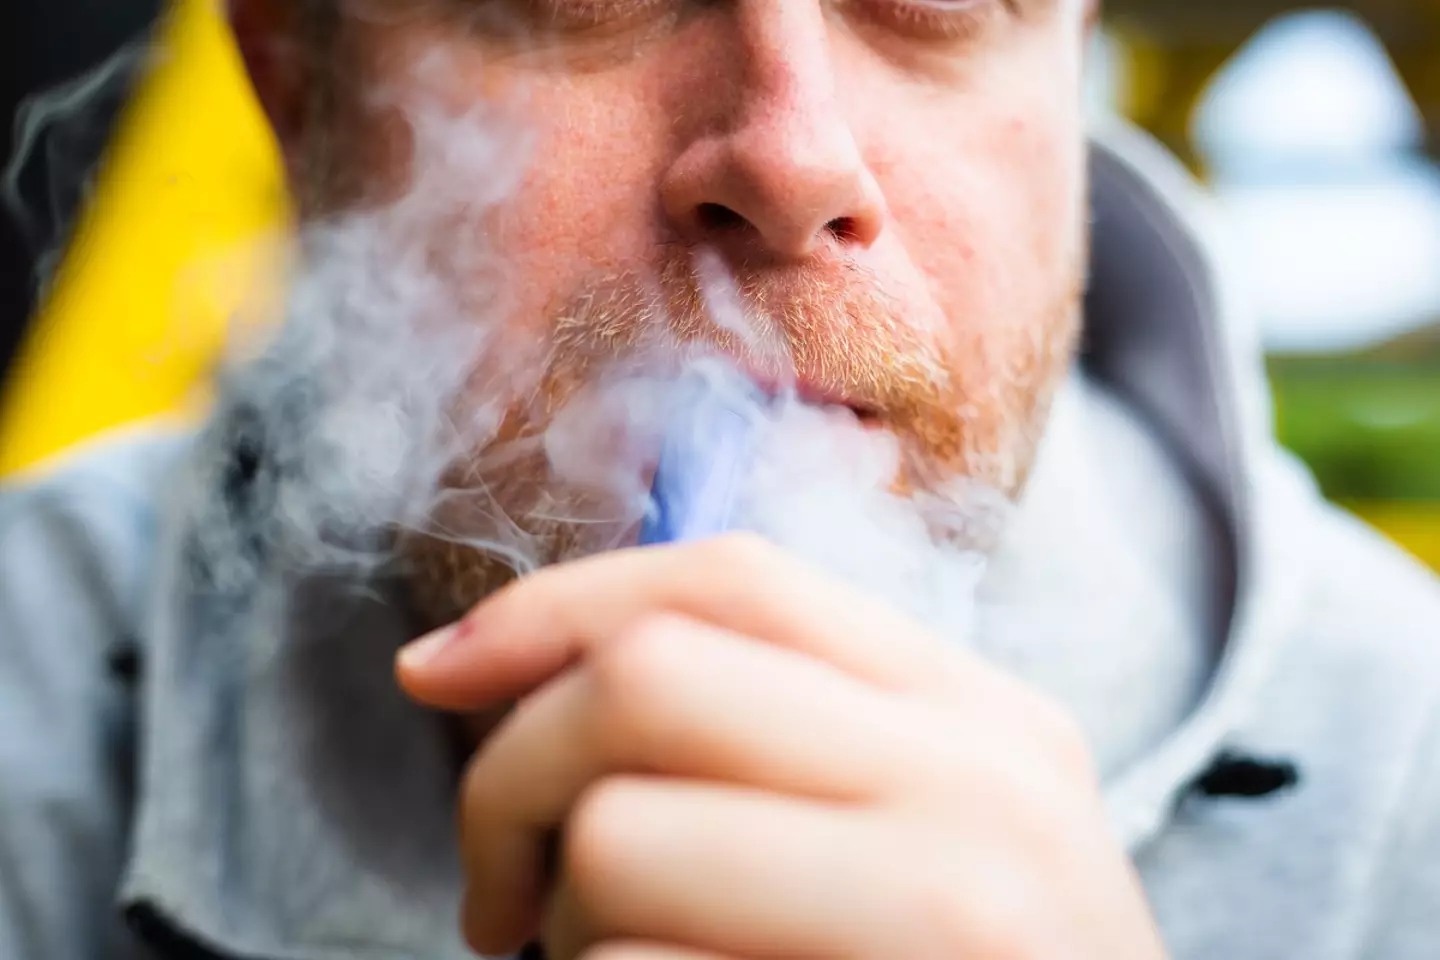 Vaping is an alternative to smoking cigarettes.